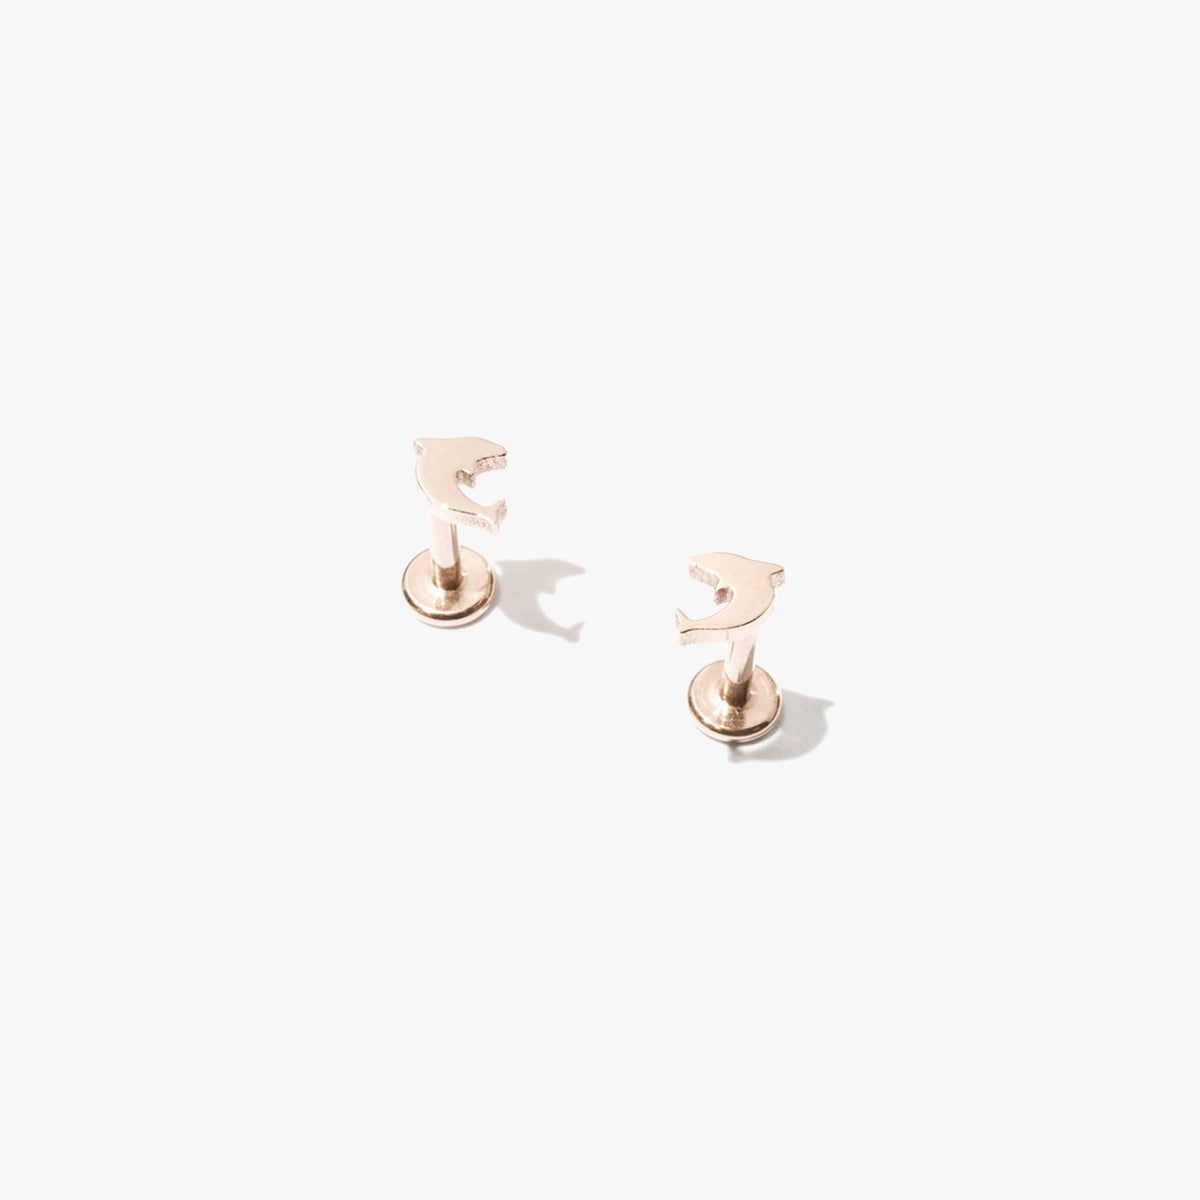 Dolphin Threaded Flat Back Studs (Pair) Gold / 6 mm